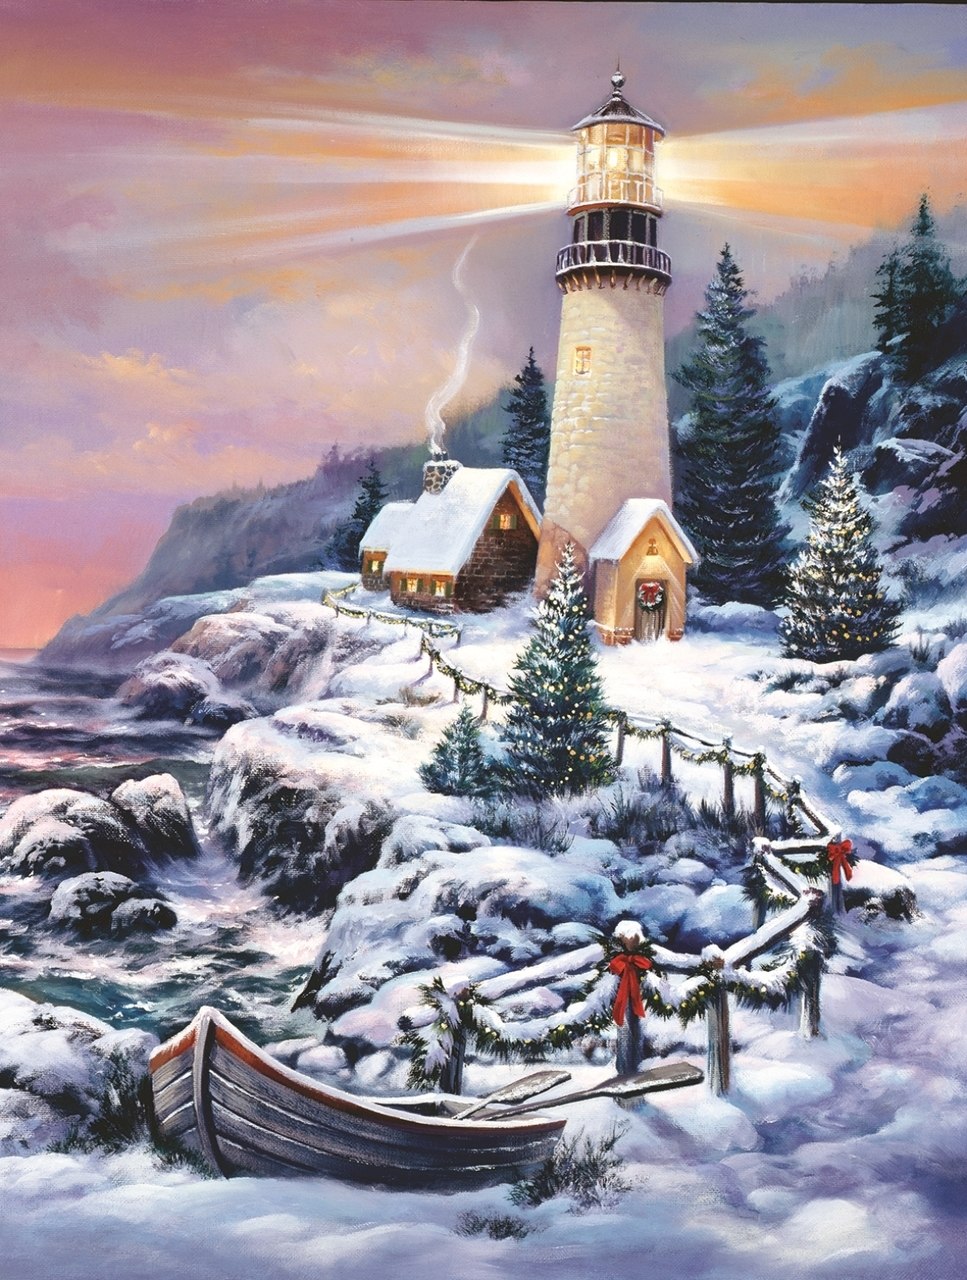 Snowy Path - 300pc Jigsaw Puzzle By Sunsout  			  					NEW